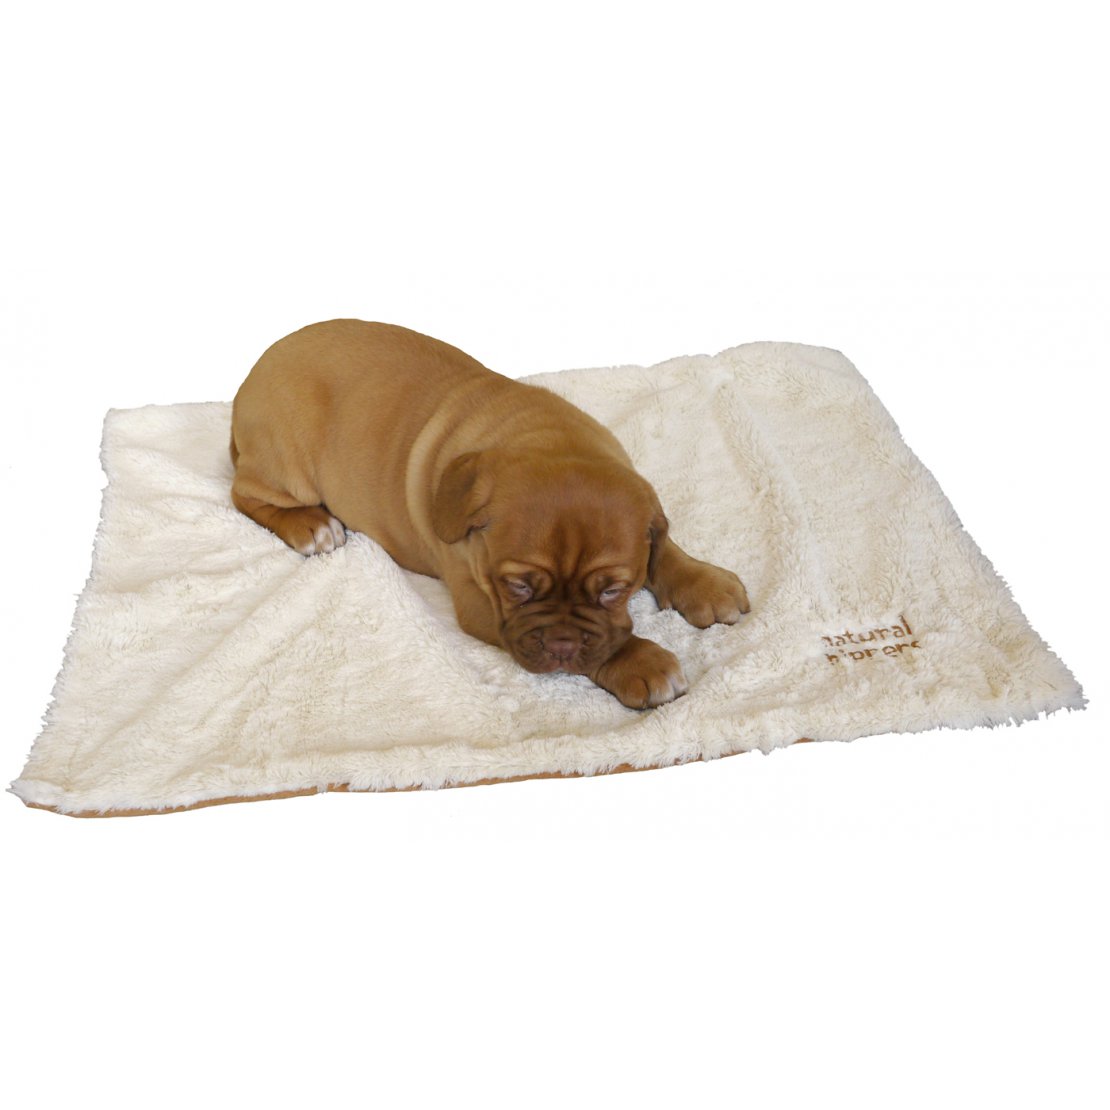 Rosewood Natural Nippers Puppy Blanket